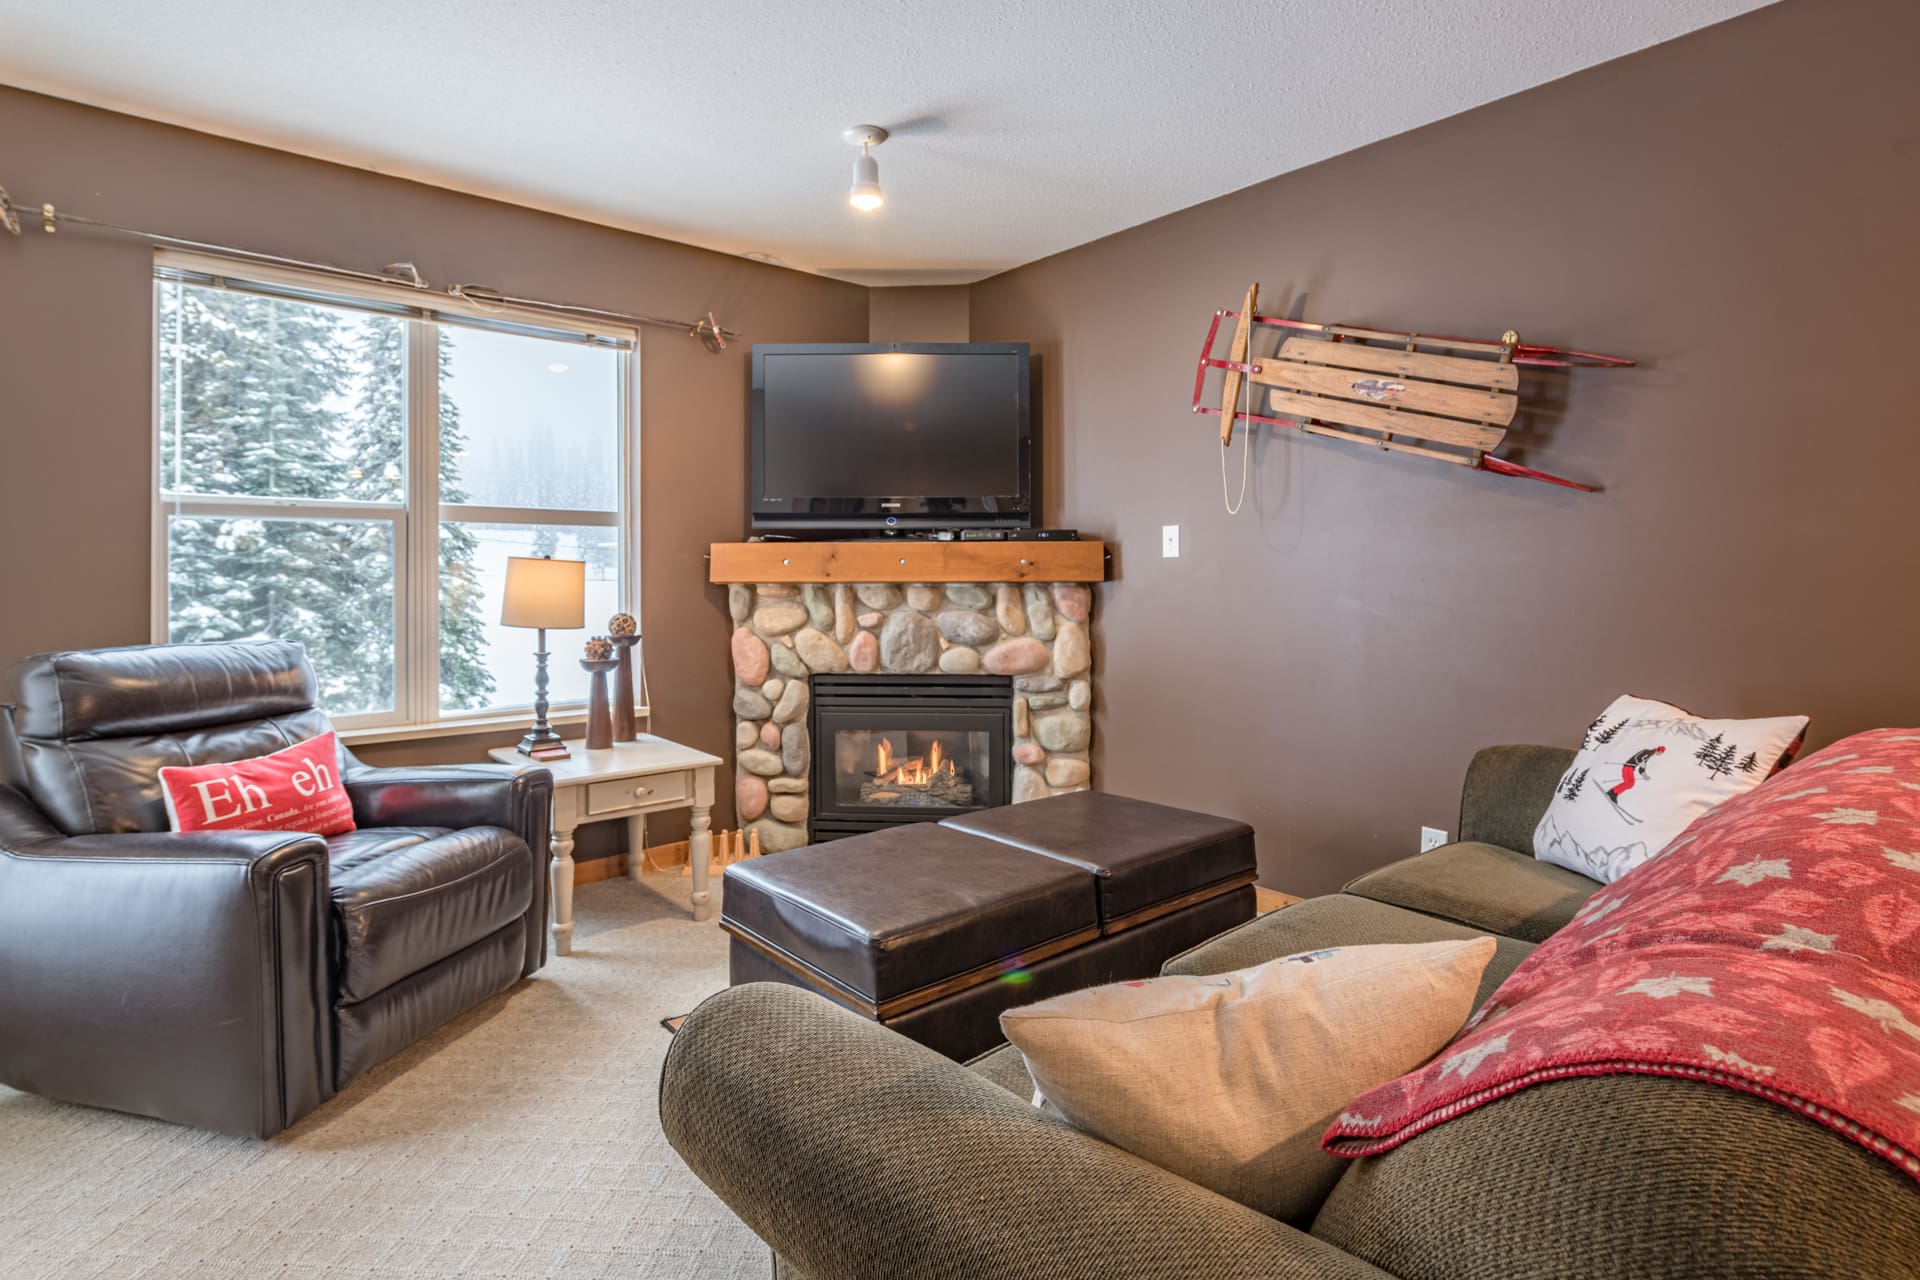 Living room of top floor condo with bright open windows, updated furniture, gas fireplace, TV, large balcony with BBQ, and amazing ski access directly slopeside.